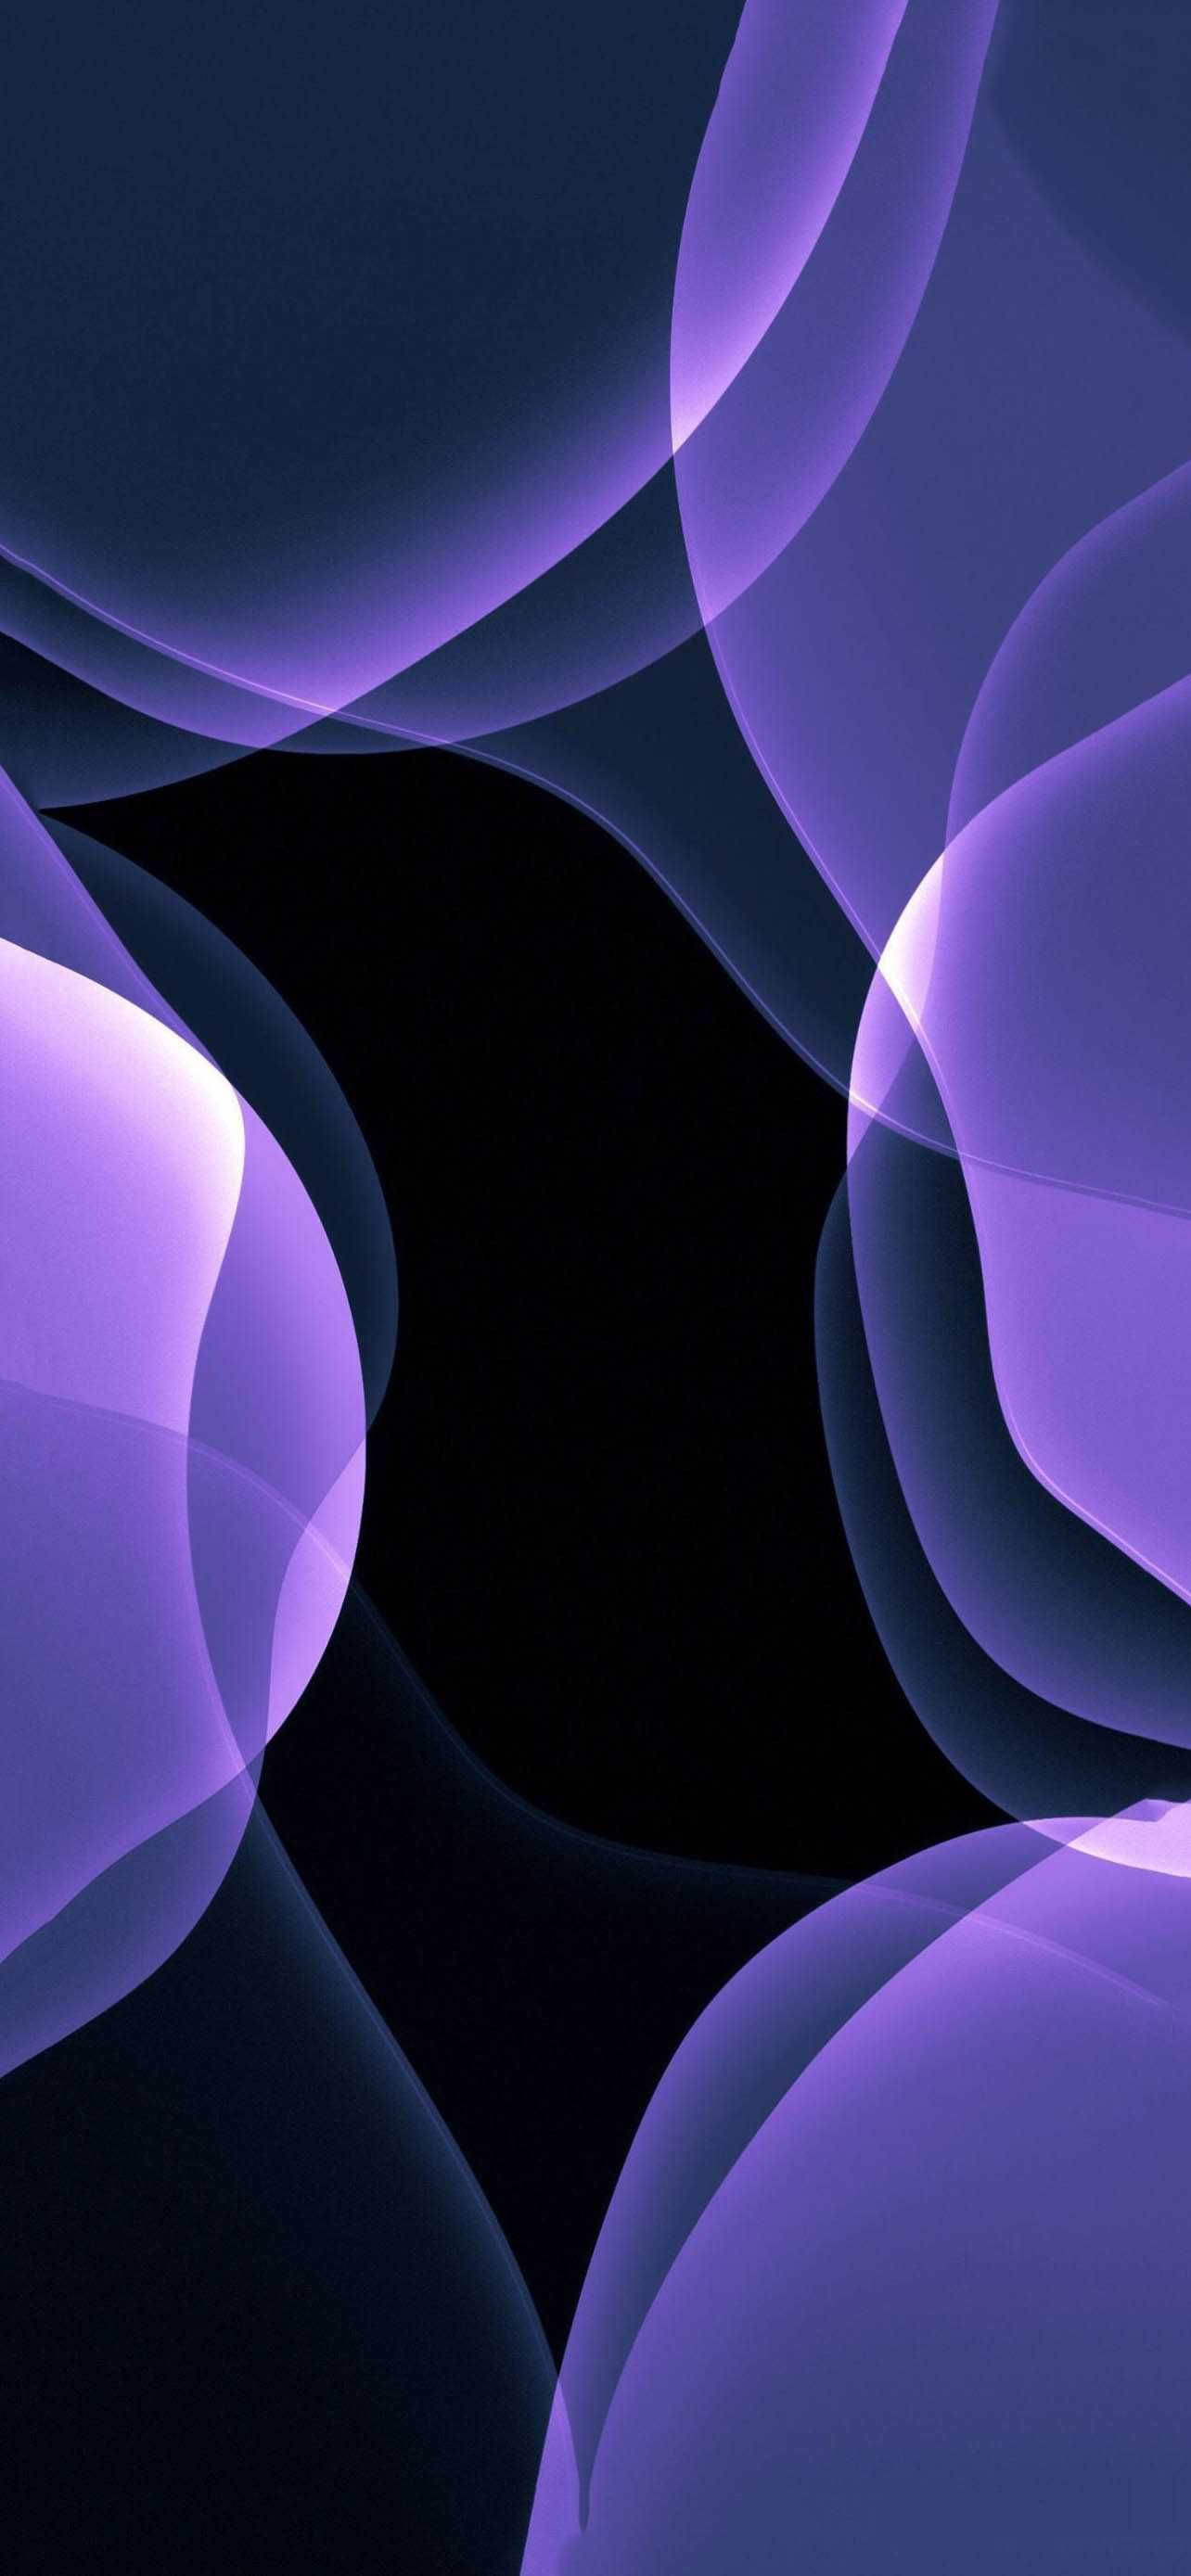 iPhone 13 Pro Max Wallpapers Discover more Aesthetic, Apple, IOS, iOS 15, iPhone … in 2021